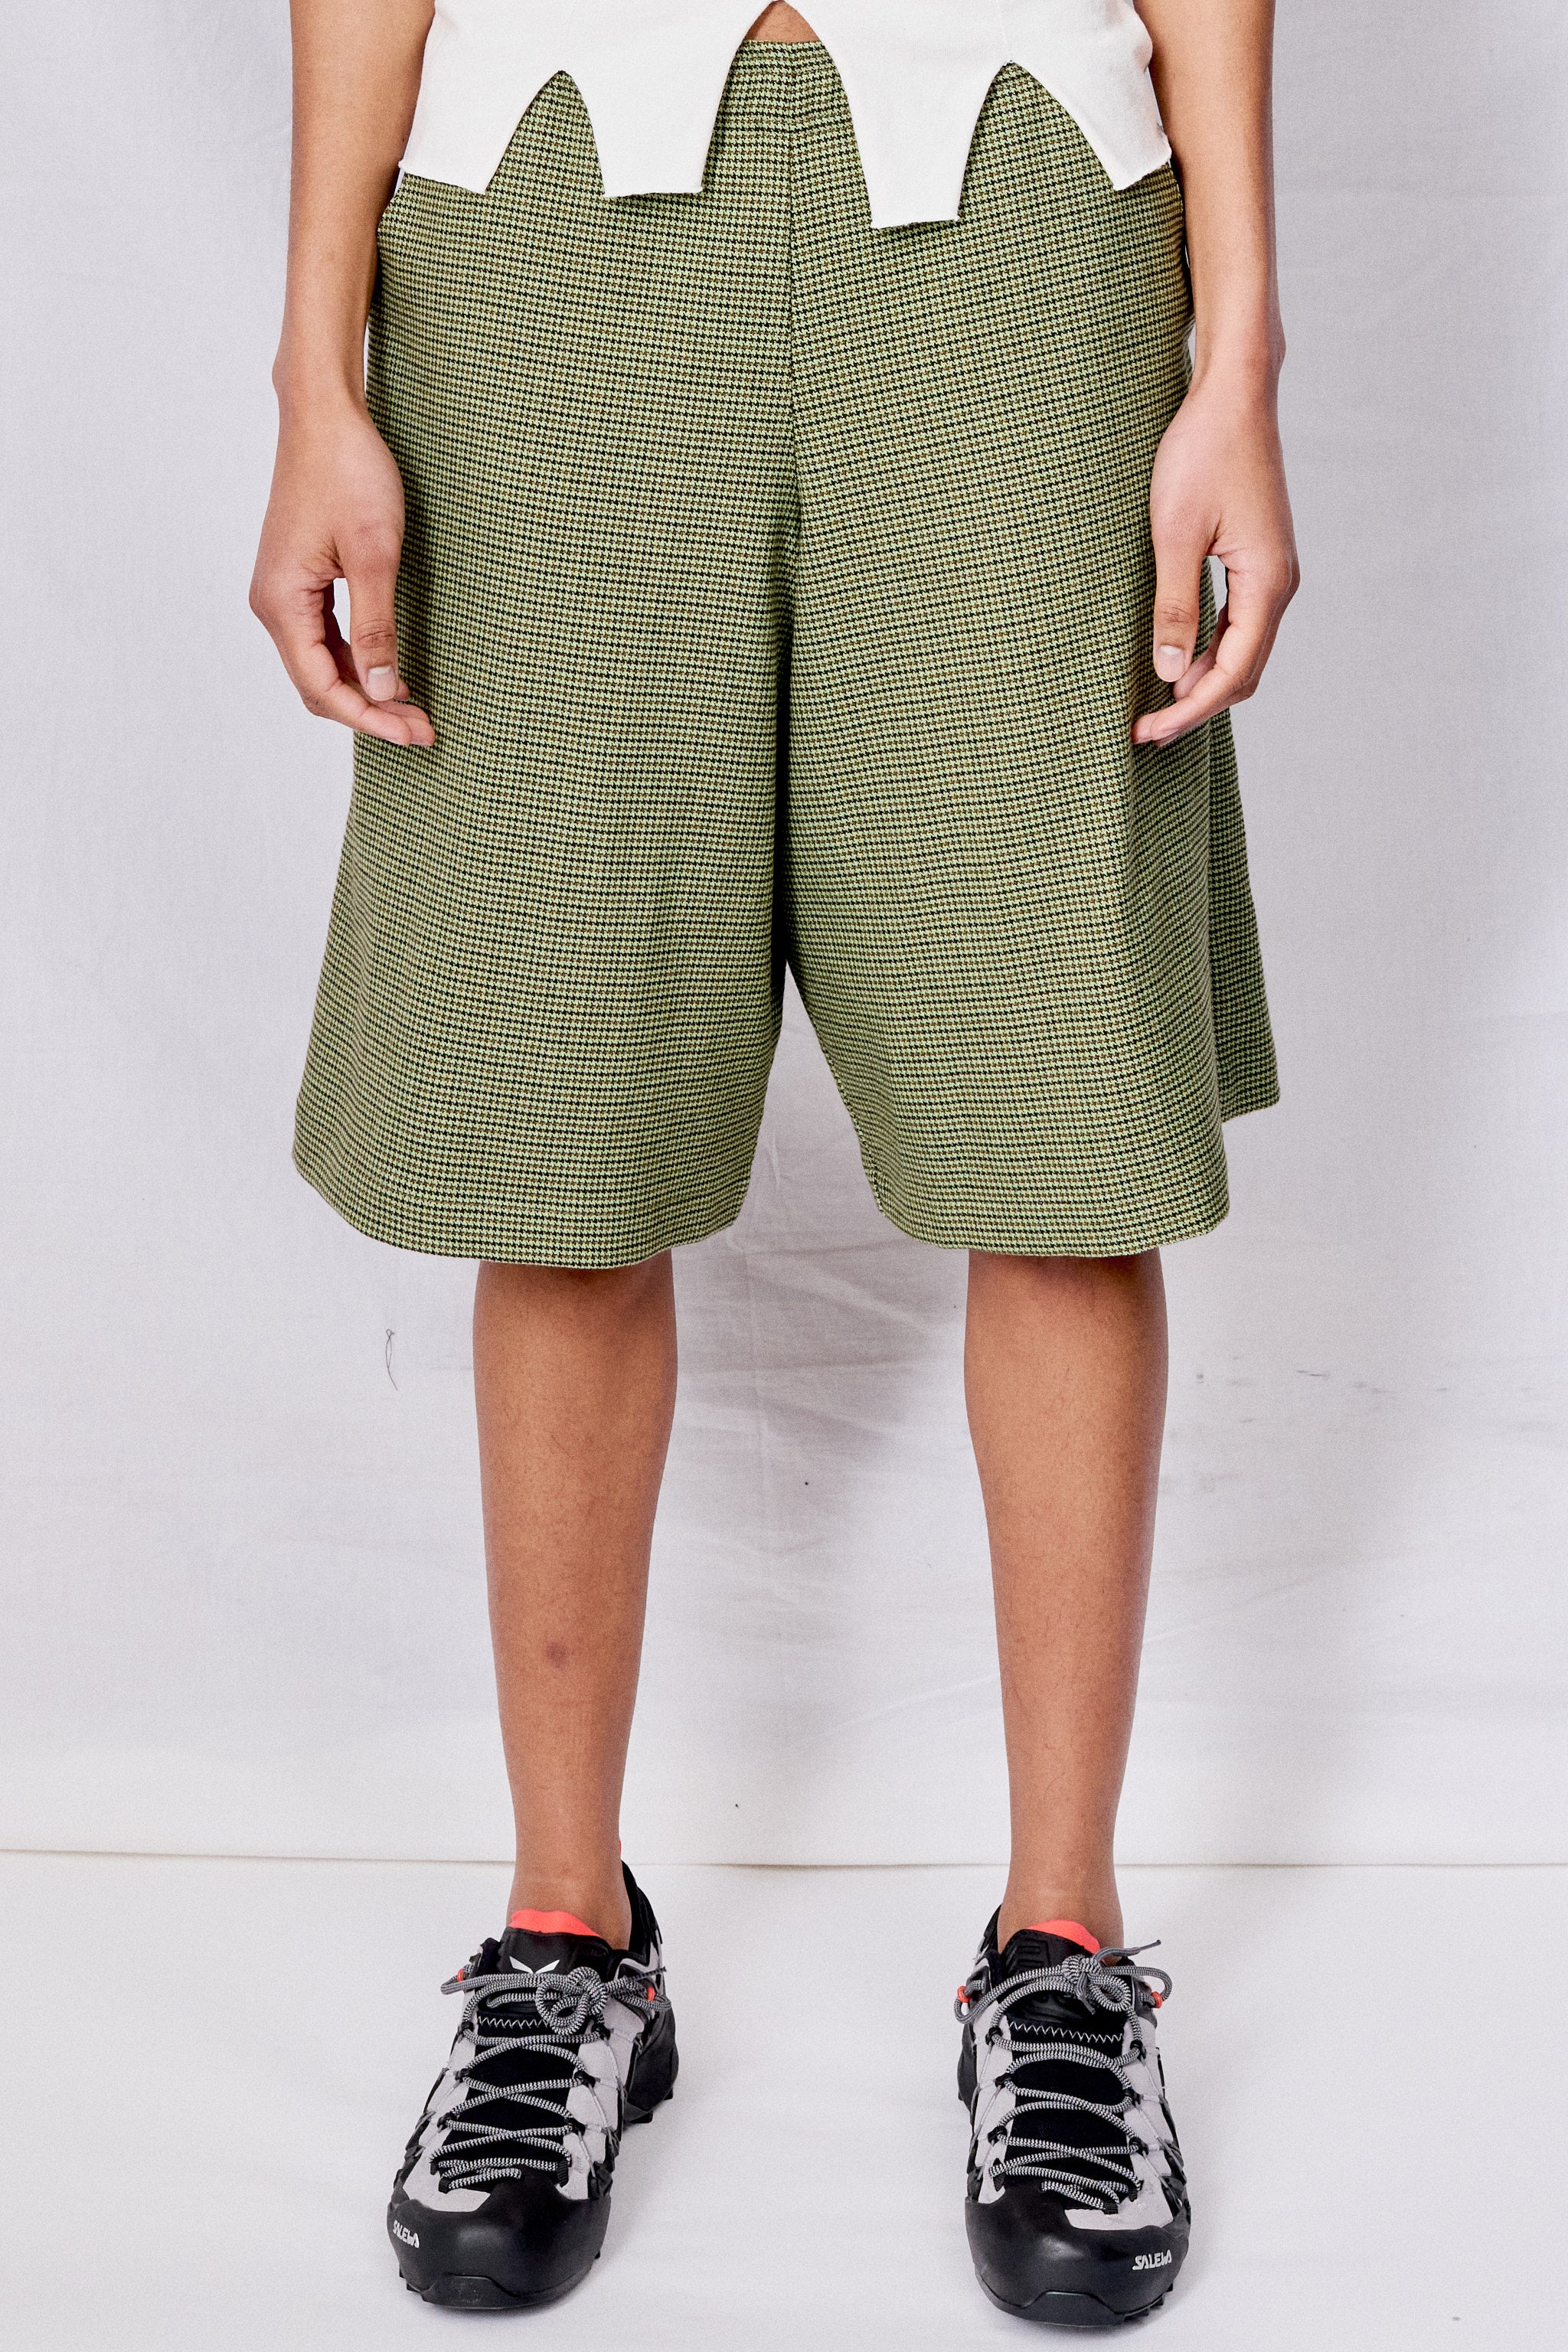 Green Houndstooth Suiting Long Short